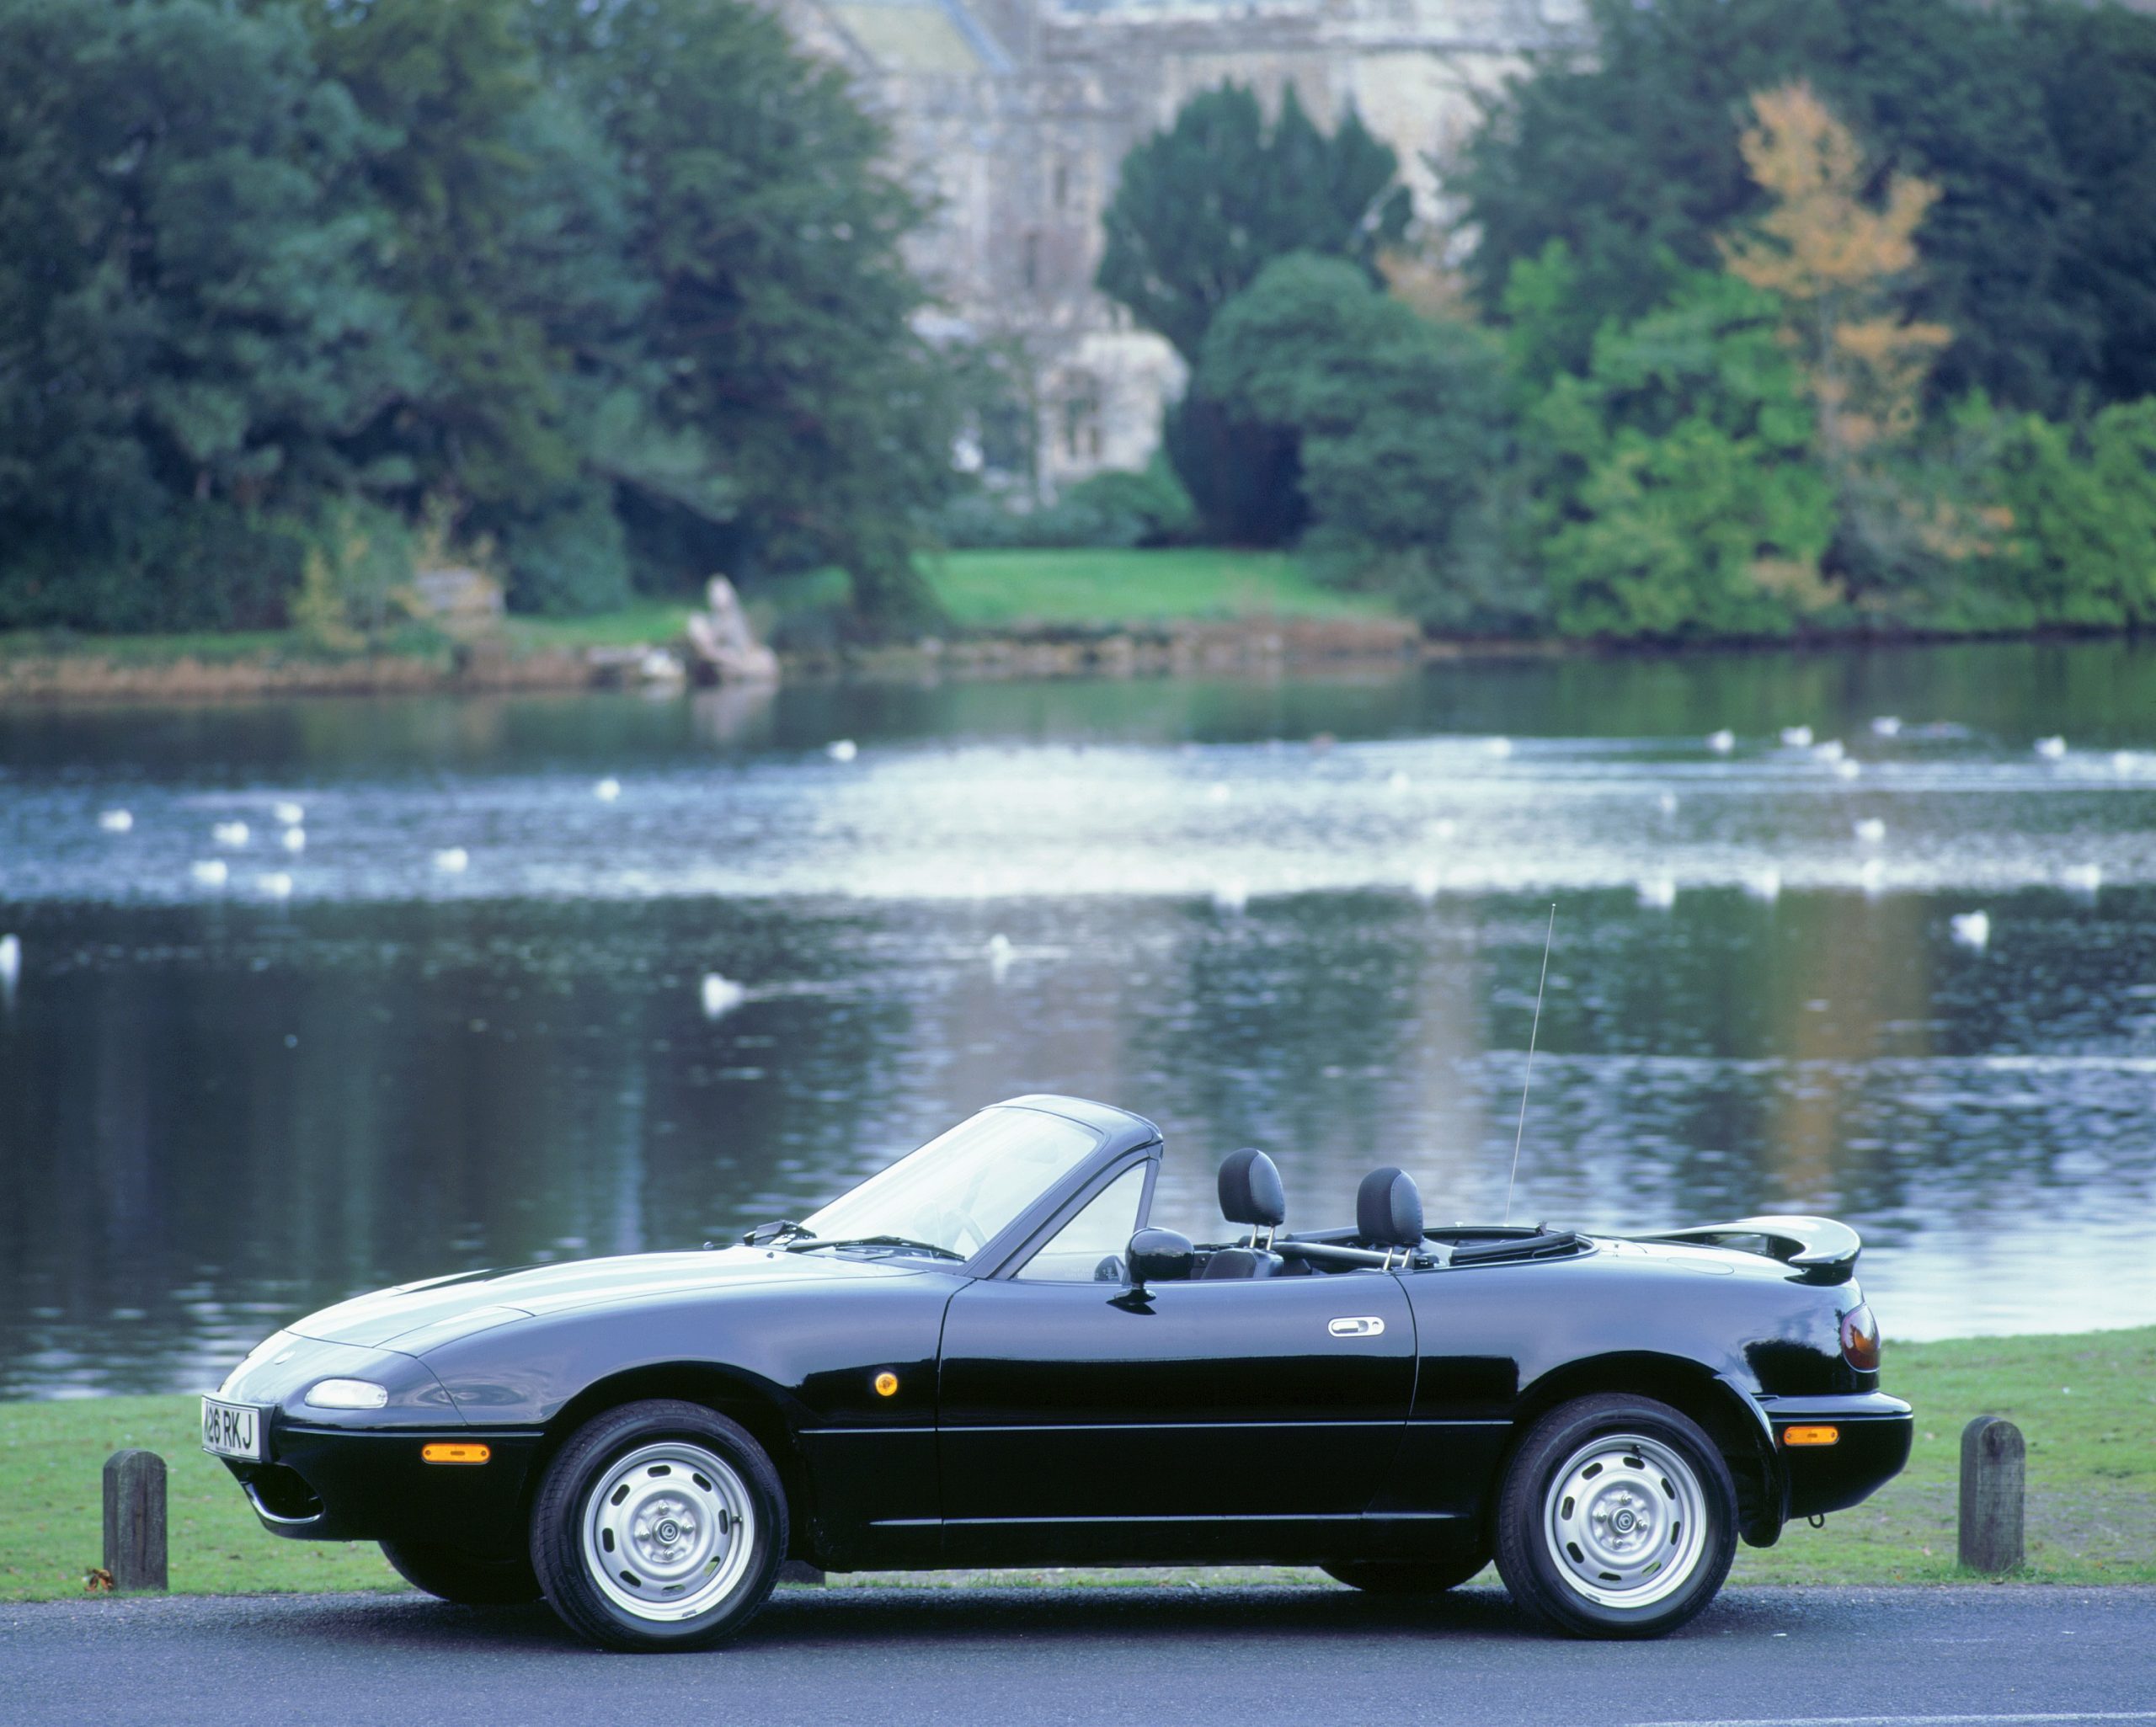 A black NA generation Miata shot in profile in front of a lake in the UK